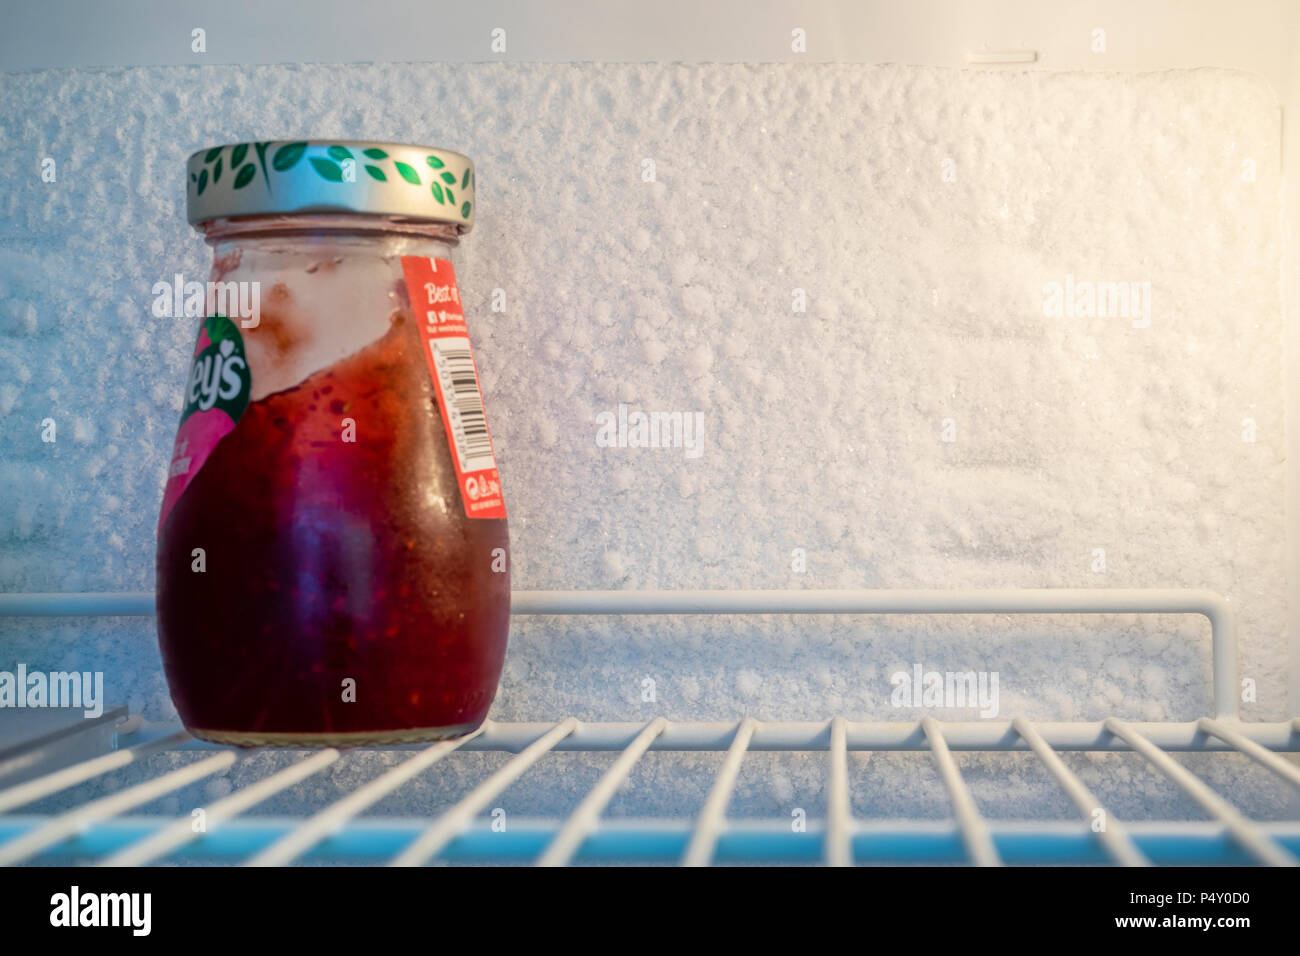 Jam jar on a shelf inside a fridge with a layer of ice on the wall built up in a fridge Stock Photo